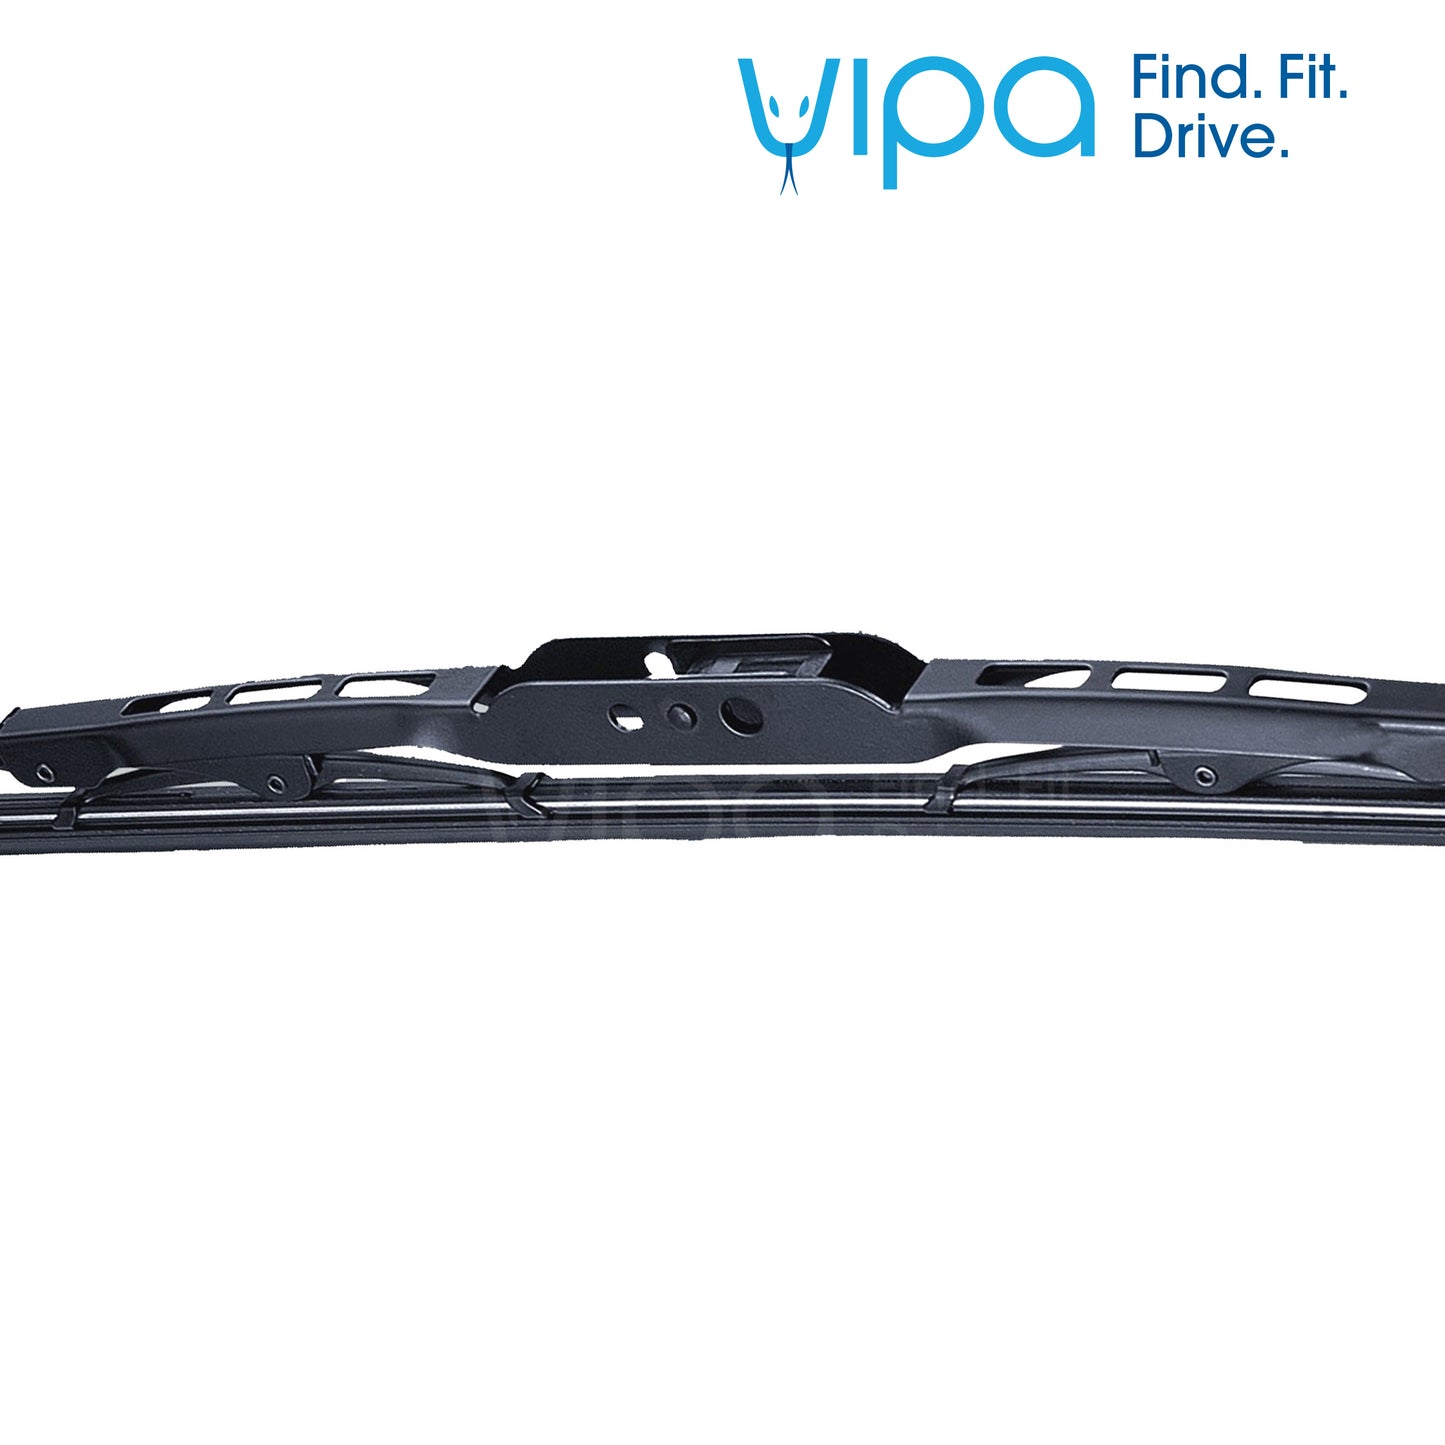 OPEL SIGNUM Hatchback May 2003 to Dec 2008 Wiper Blade Kit